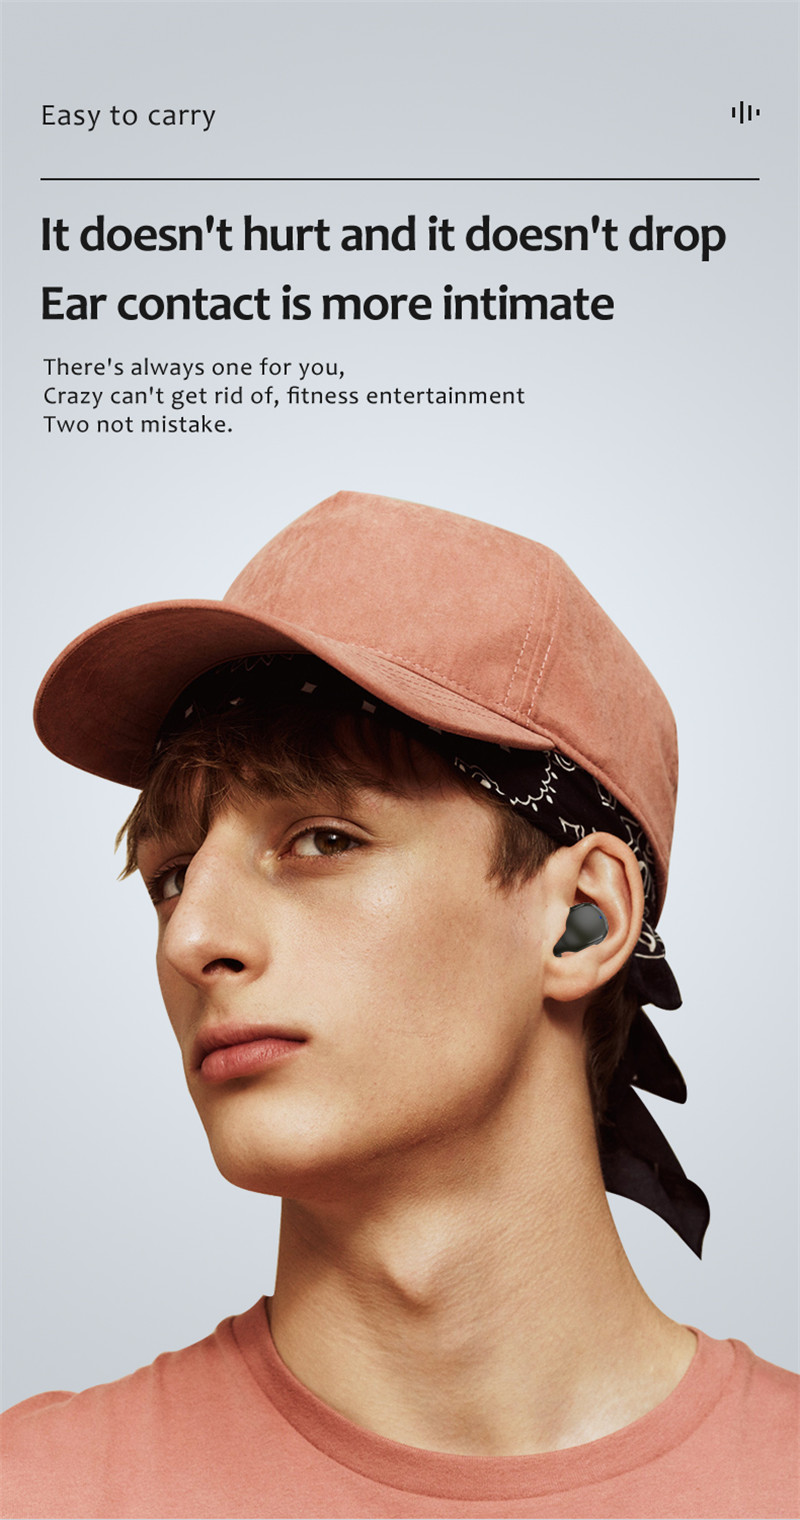 F-XY-60 Type-C Smart Touch Control Anc-Active Noise Cancelling Headphones Wireless Earbuds Stereo Sound (6)